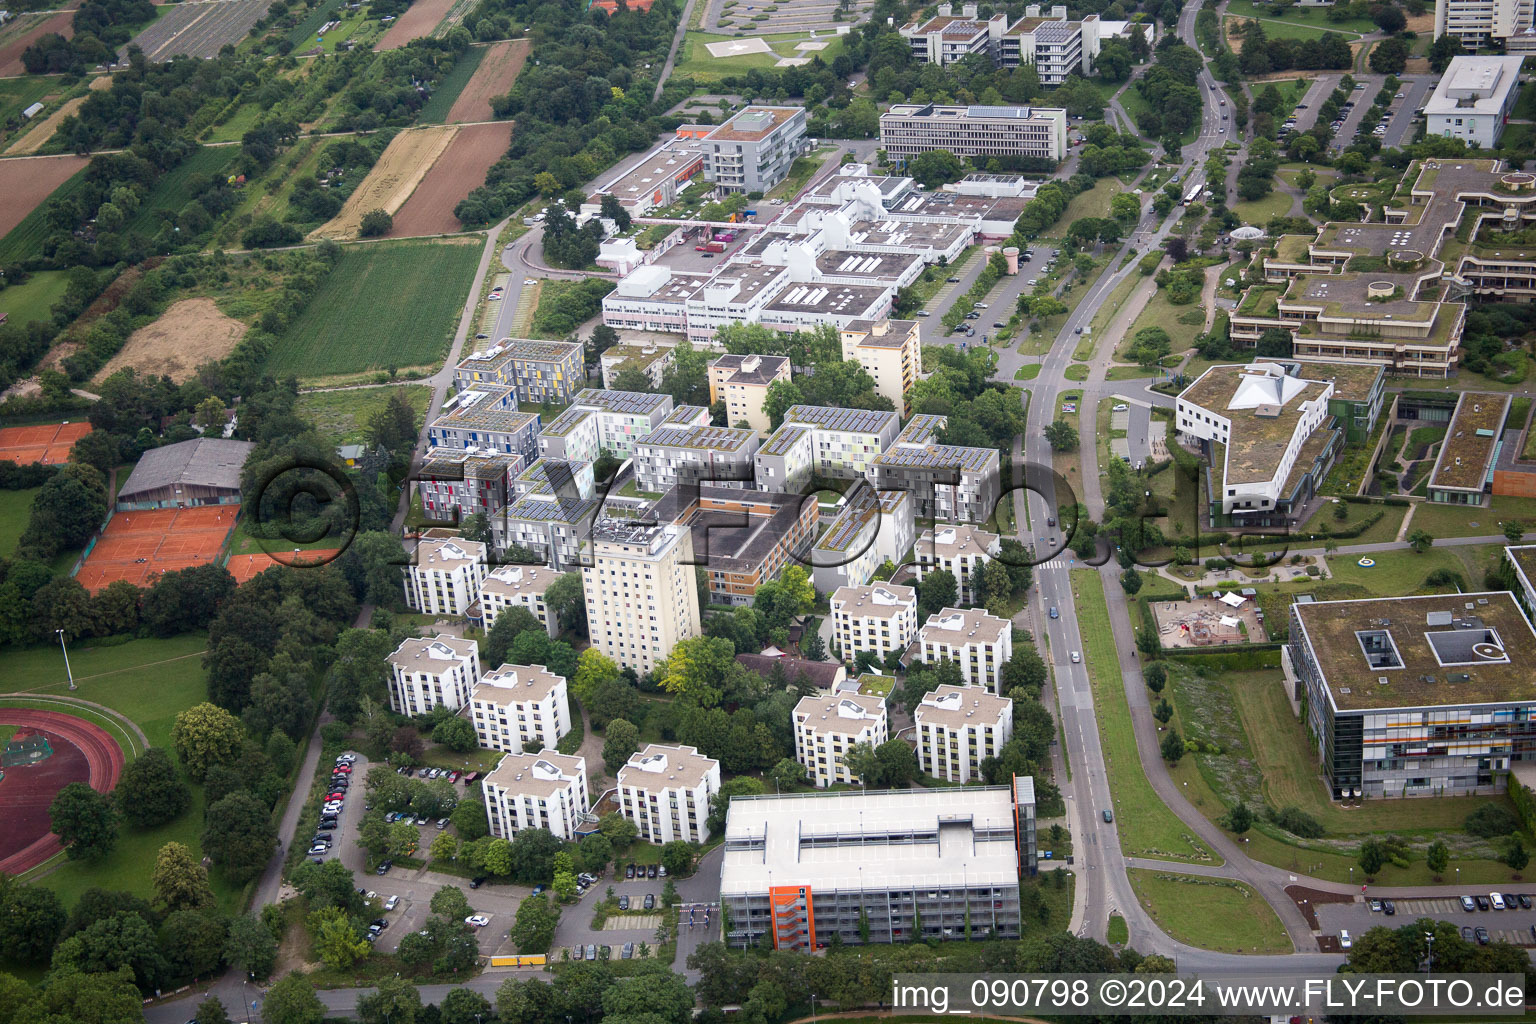 Student Residence - Building INF 681 and International studym center (ISZ) in the district Handschuhsheimer Feld in Heidelberg in the state Baden-Wurttemberg, Germany